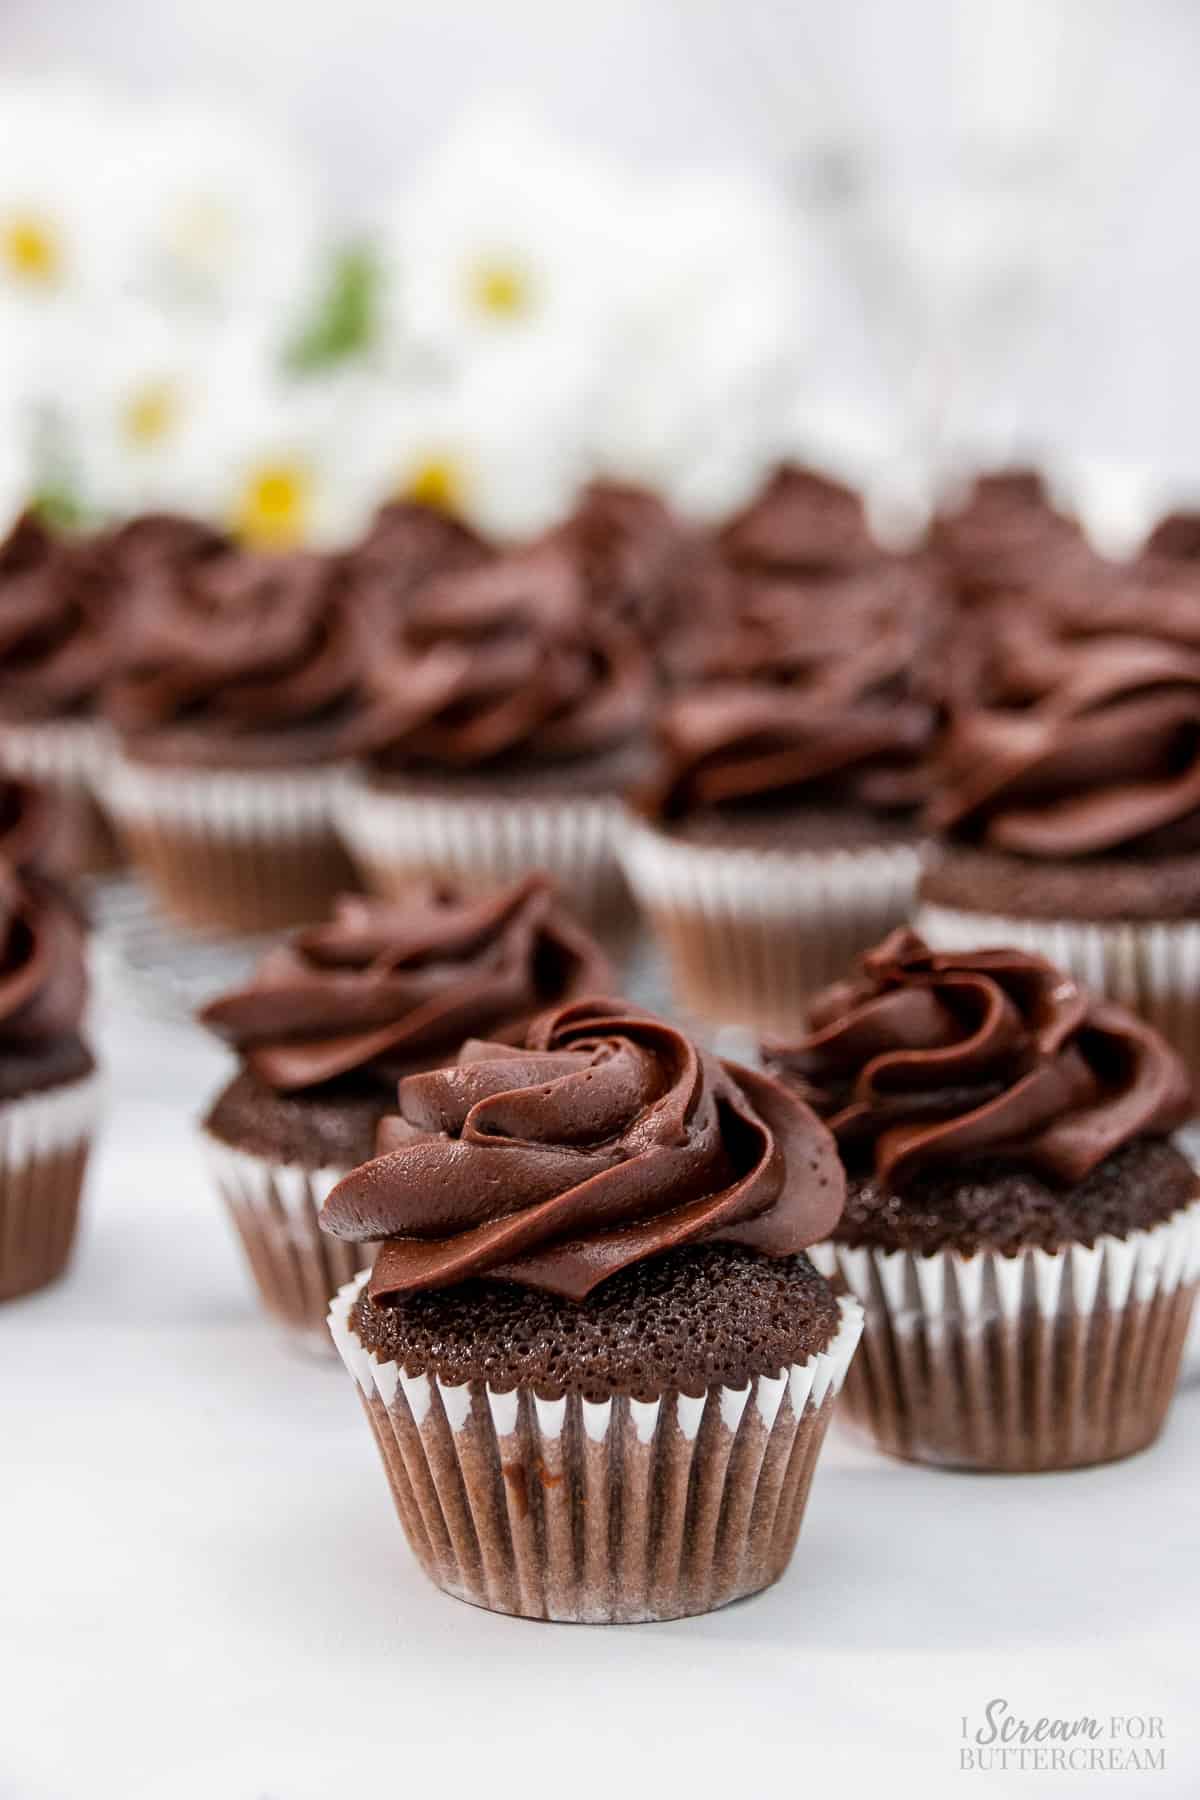 One chocolate cupcake with frosting and cupcakes in the background.